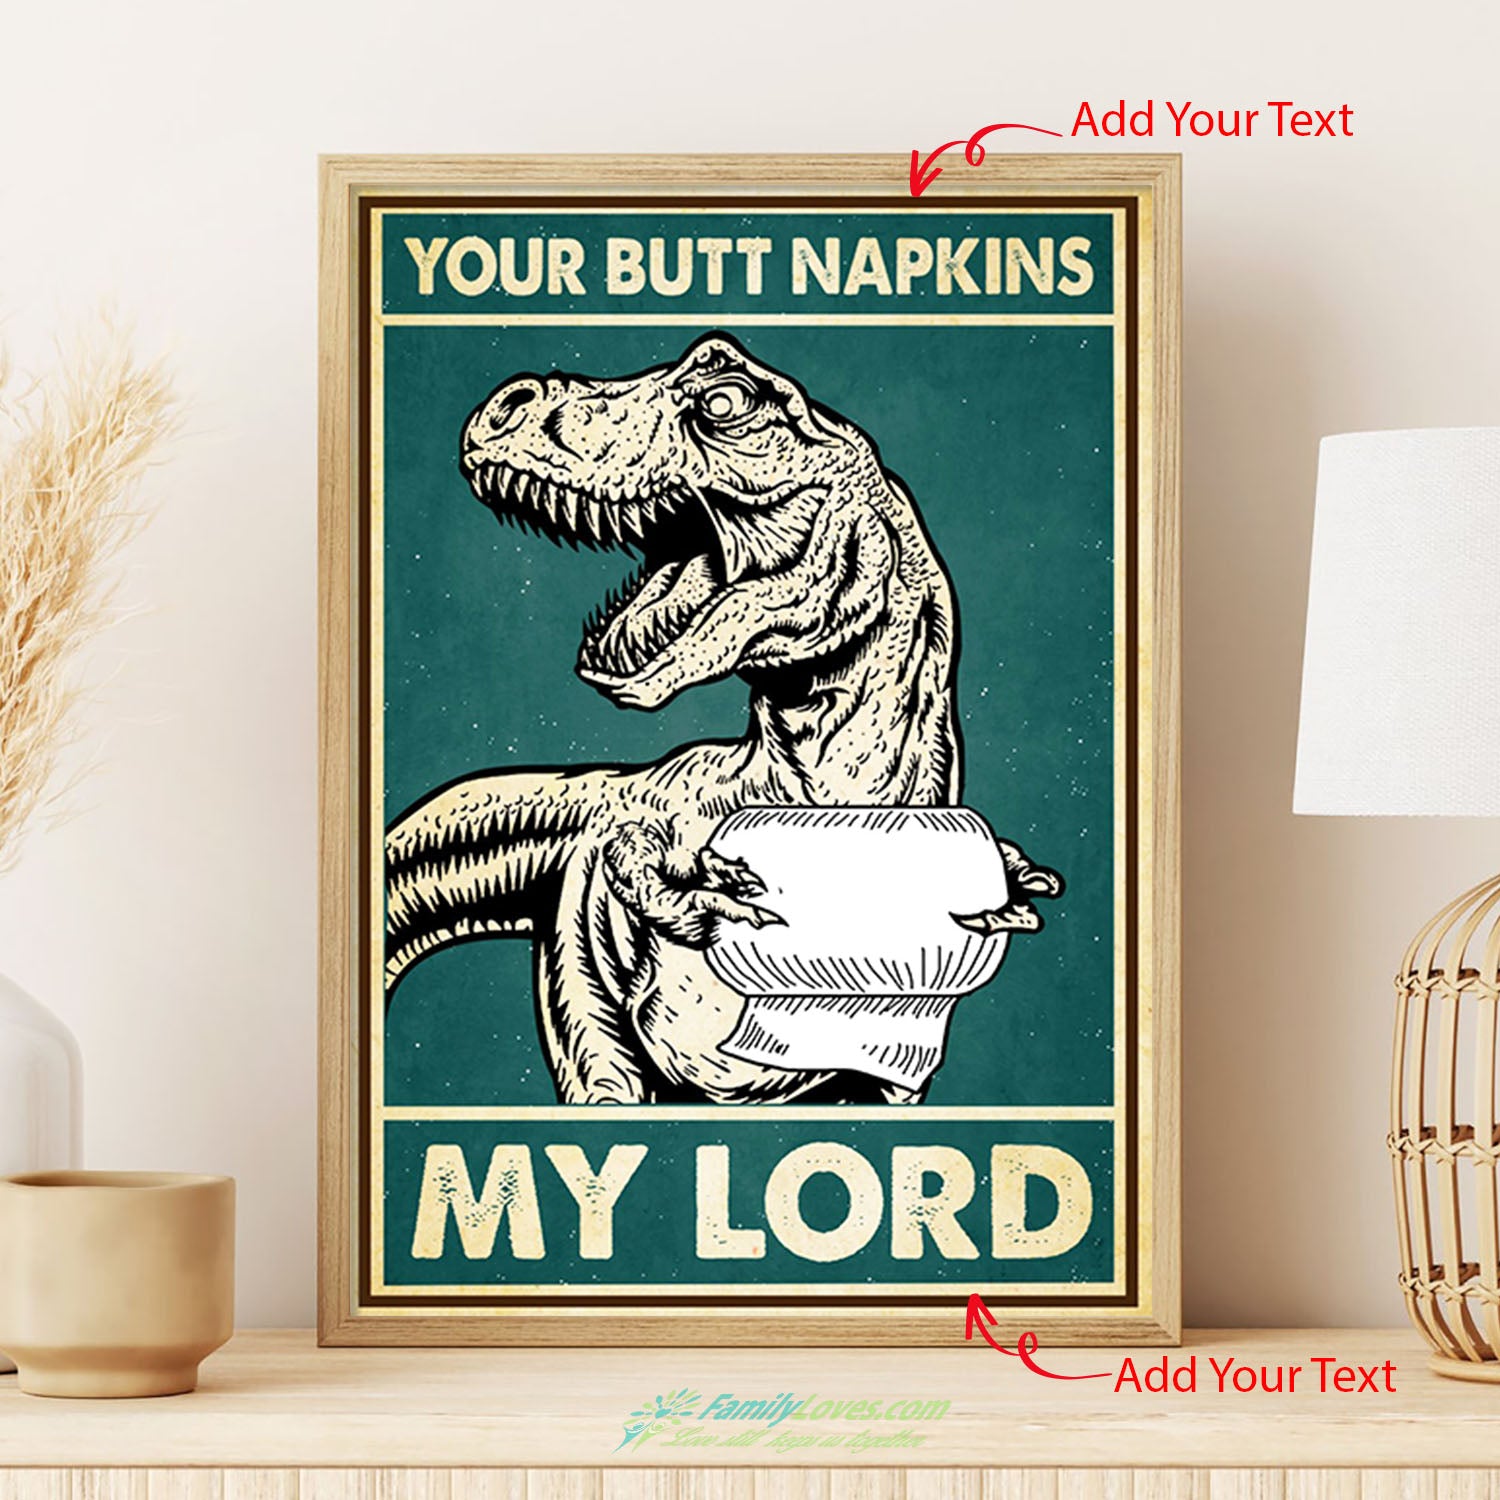 Your Butt Napkins My Lord T-Rex Canvas Fabric Poster 12X18 All Size 1